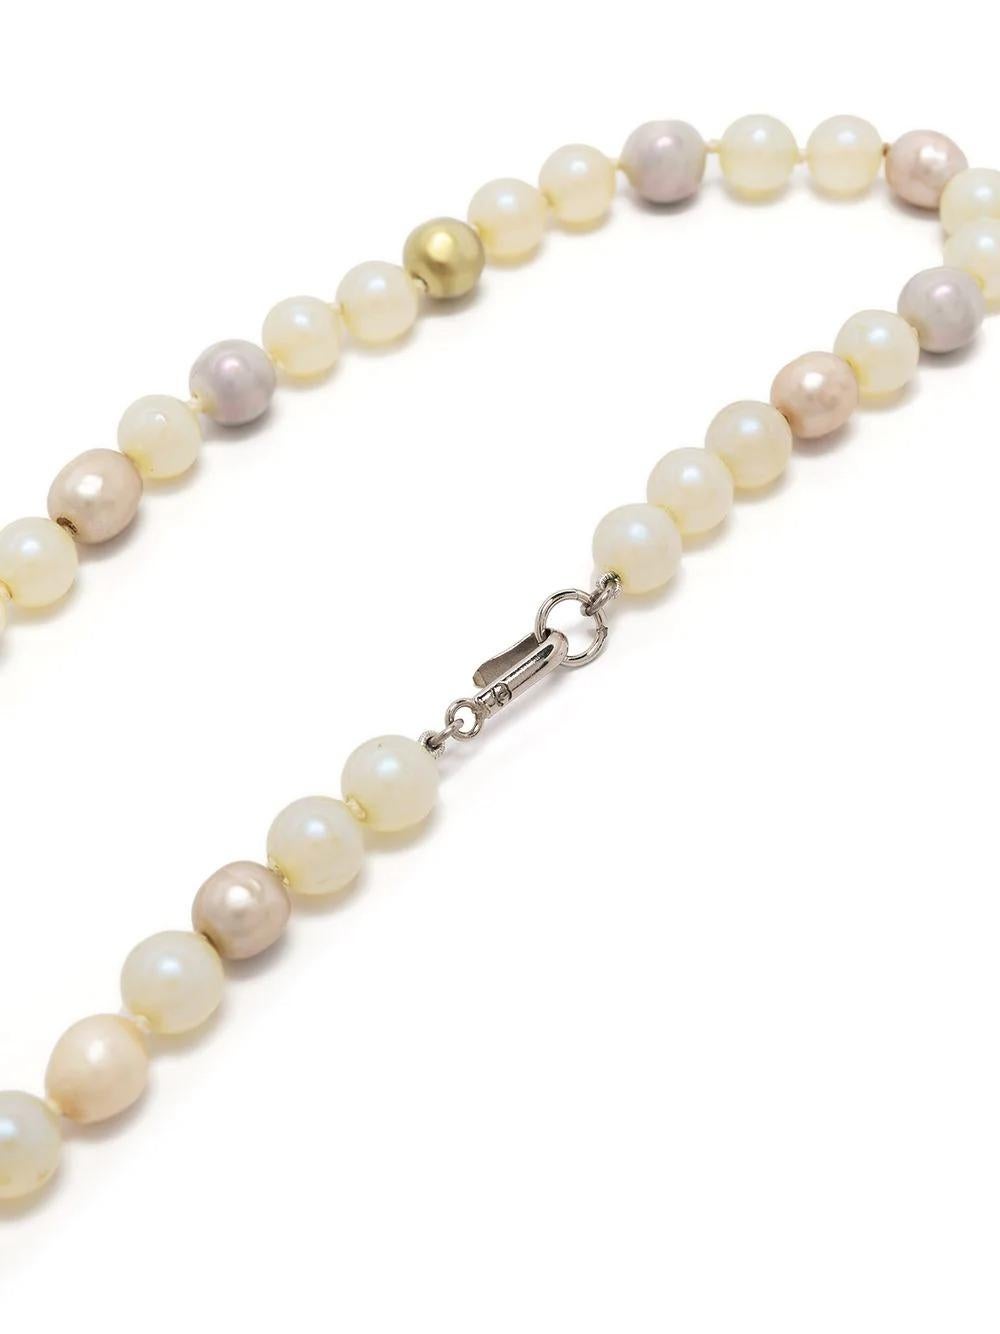 Every woman needs a piece of jewellery that not only makes a statement but works well every day too. A symbol of Chanel, pearls are said to give a flattering glow to the skin. Both timeless and versatile, this pre-owned pearl necklace from Chanel